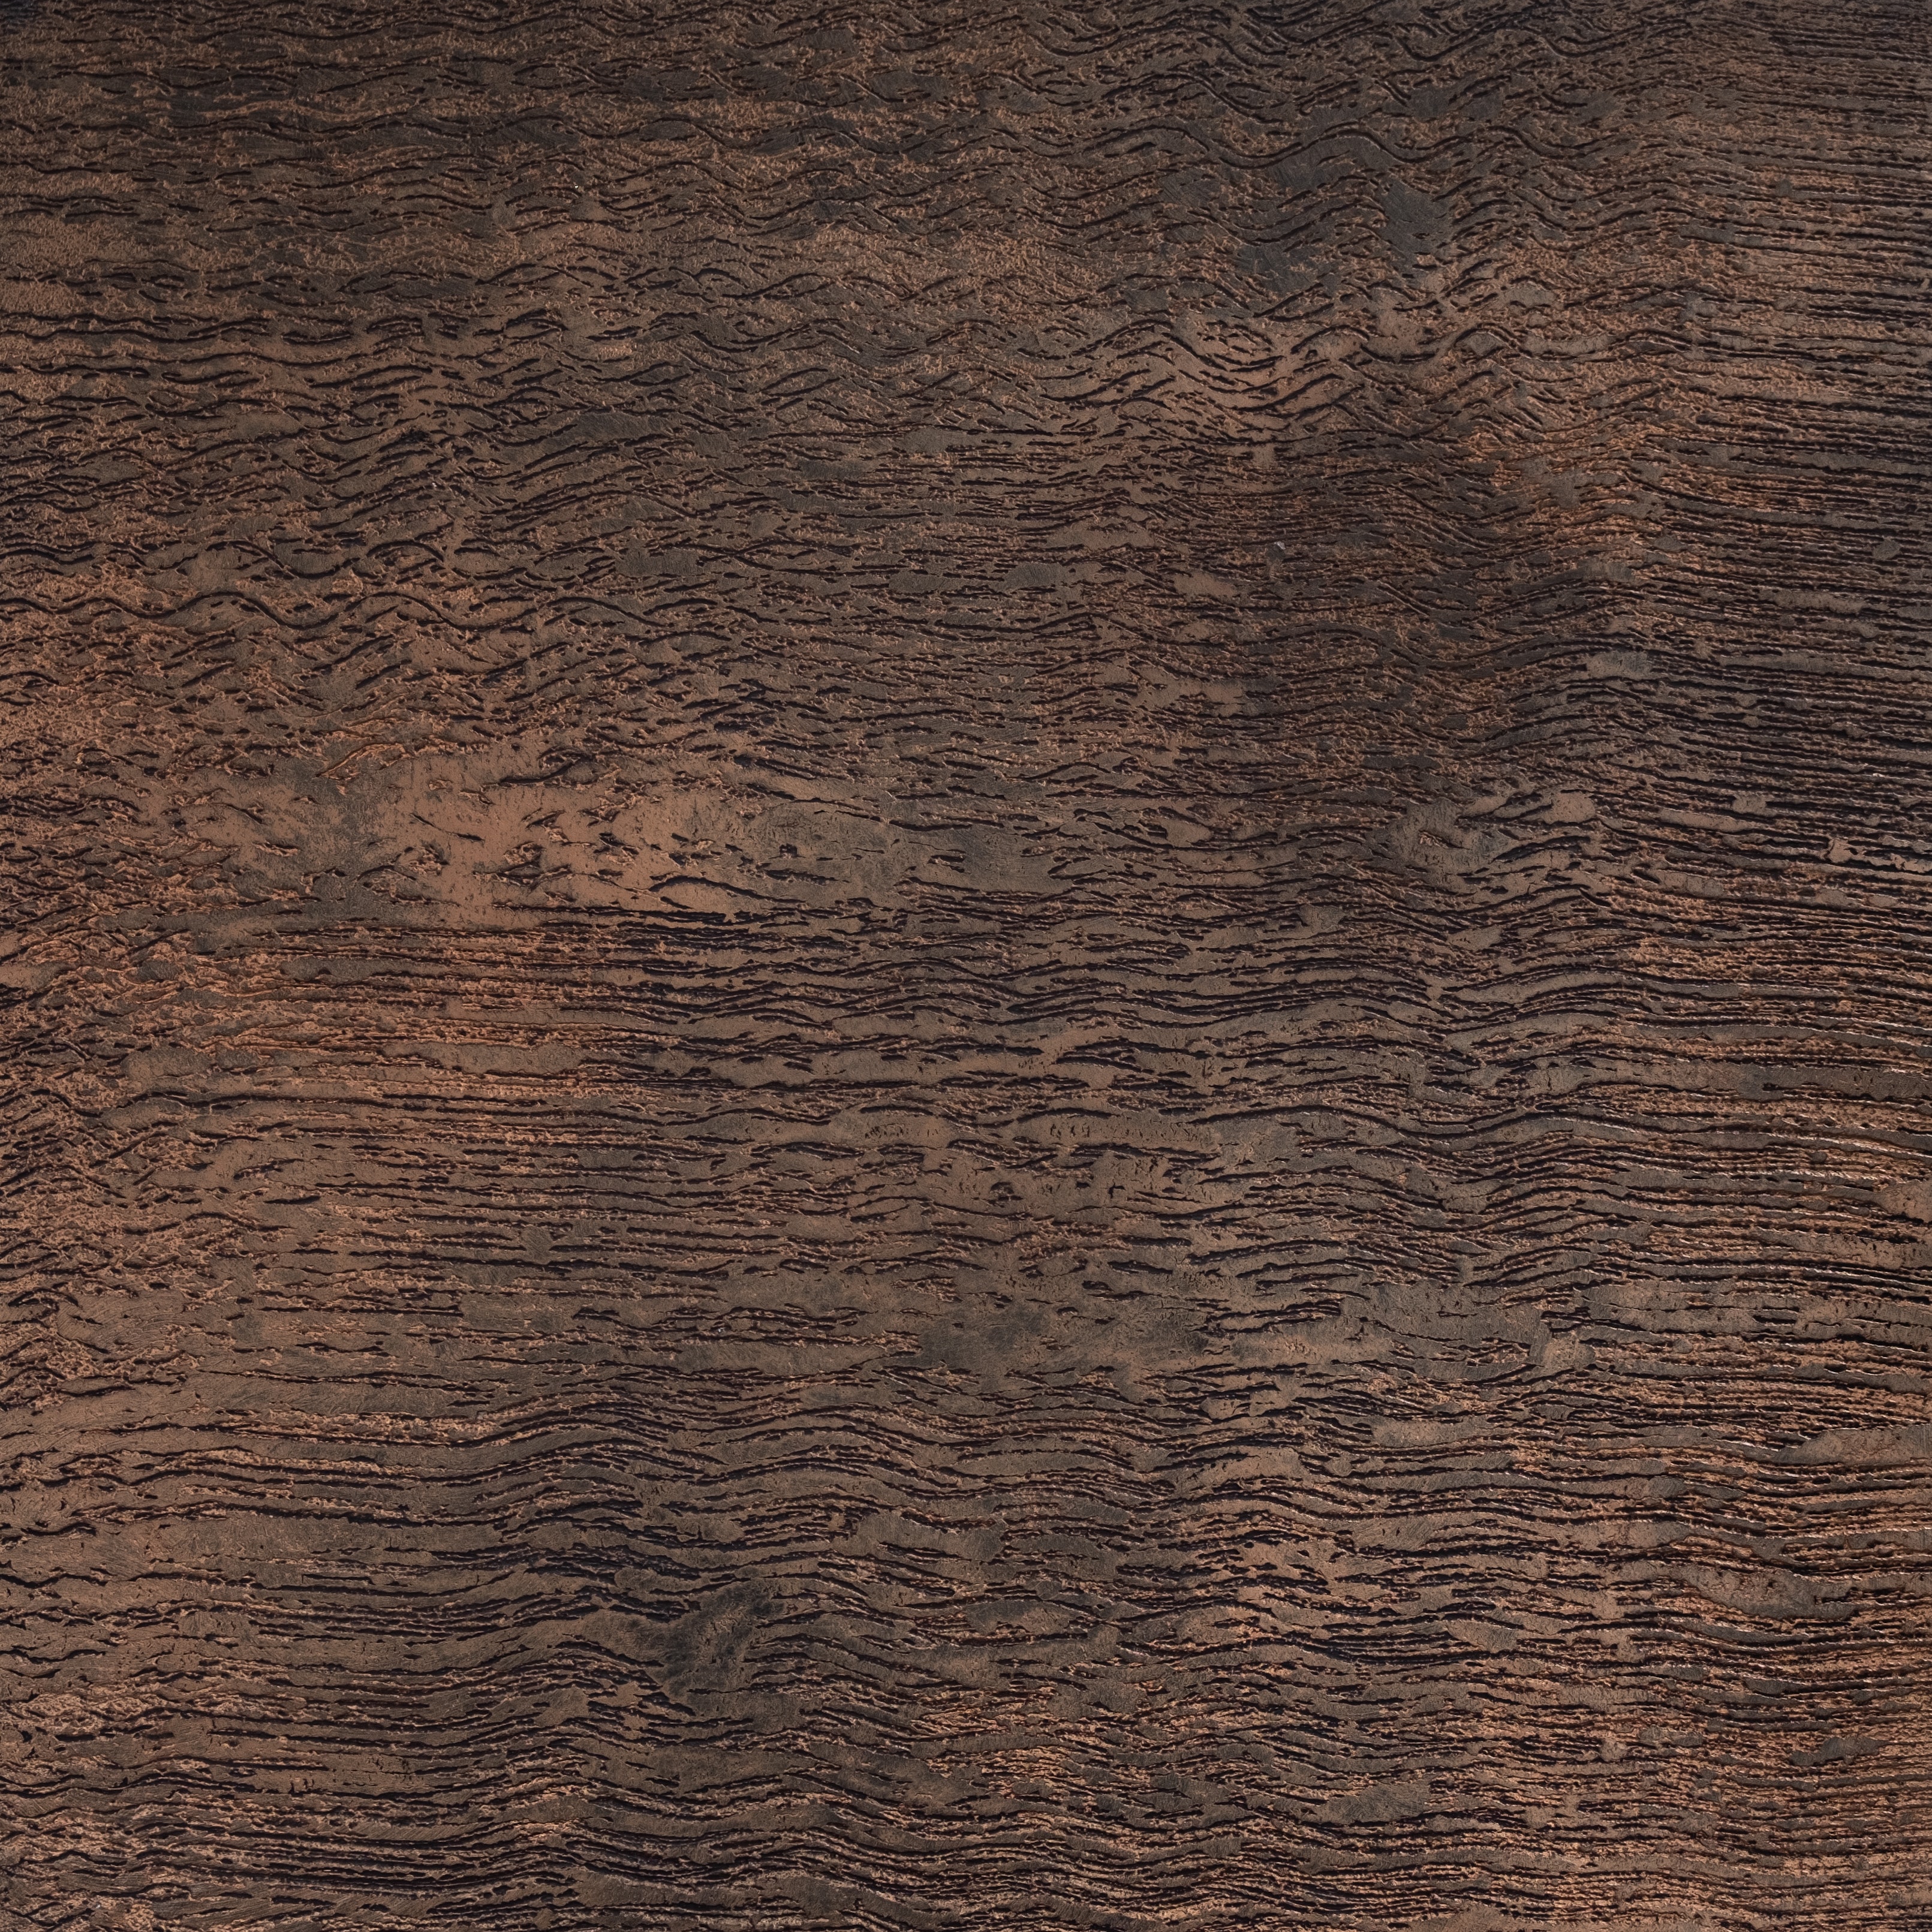 brown, textures, texture, wall, surface iphone wallpaper